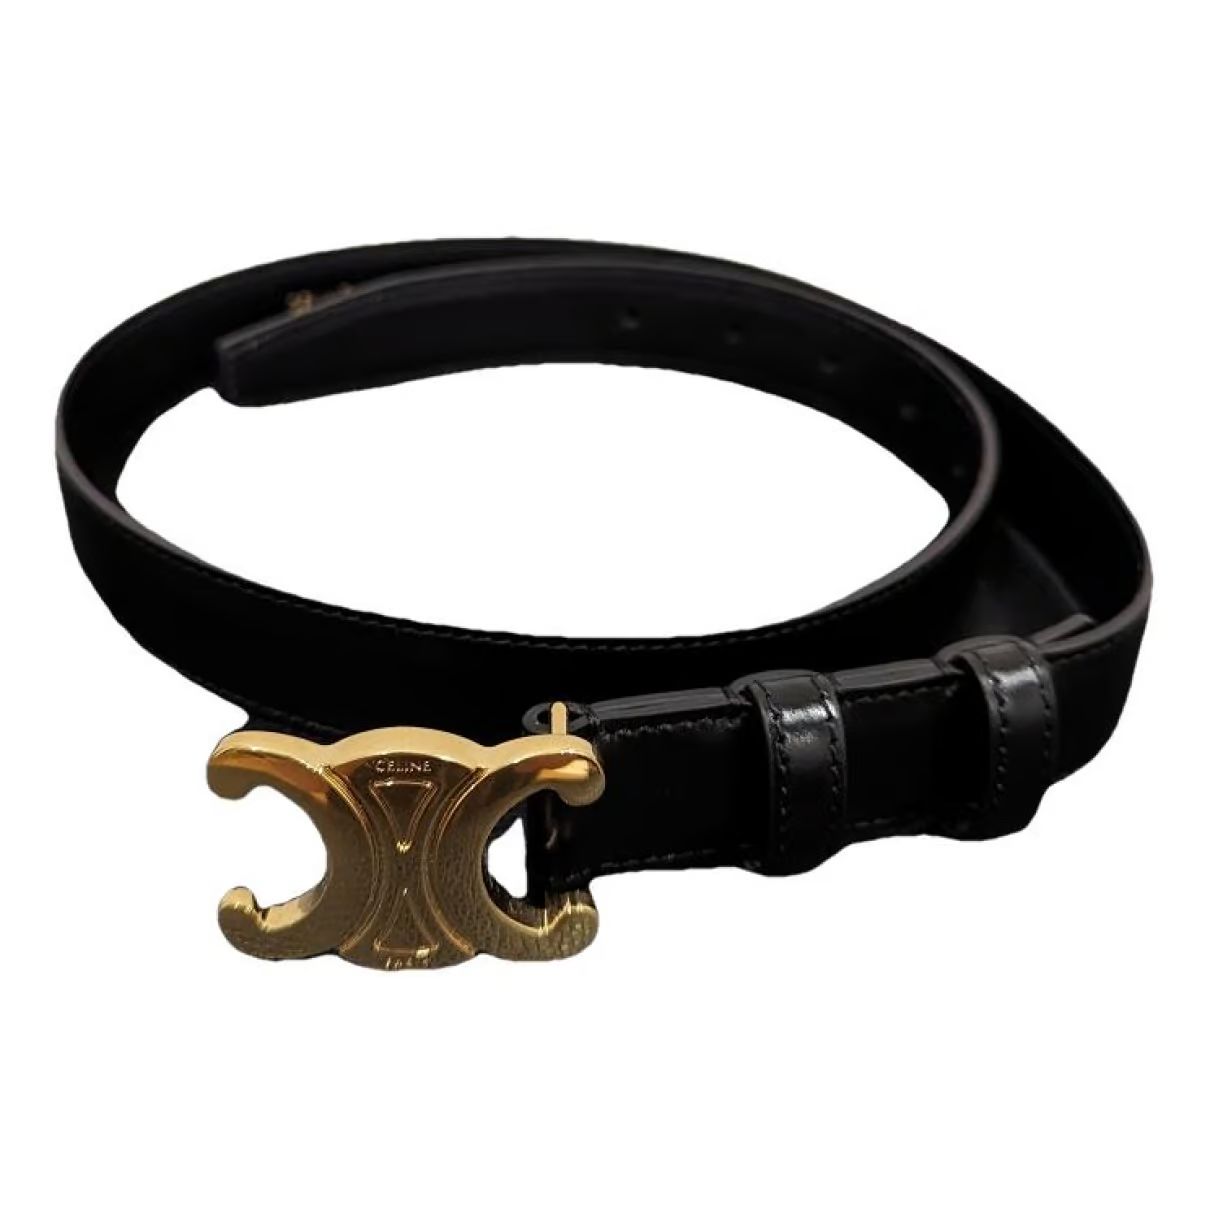 Triomphe leather belt | Vestiaire Collective (Global)